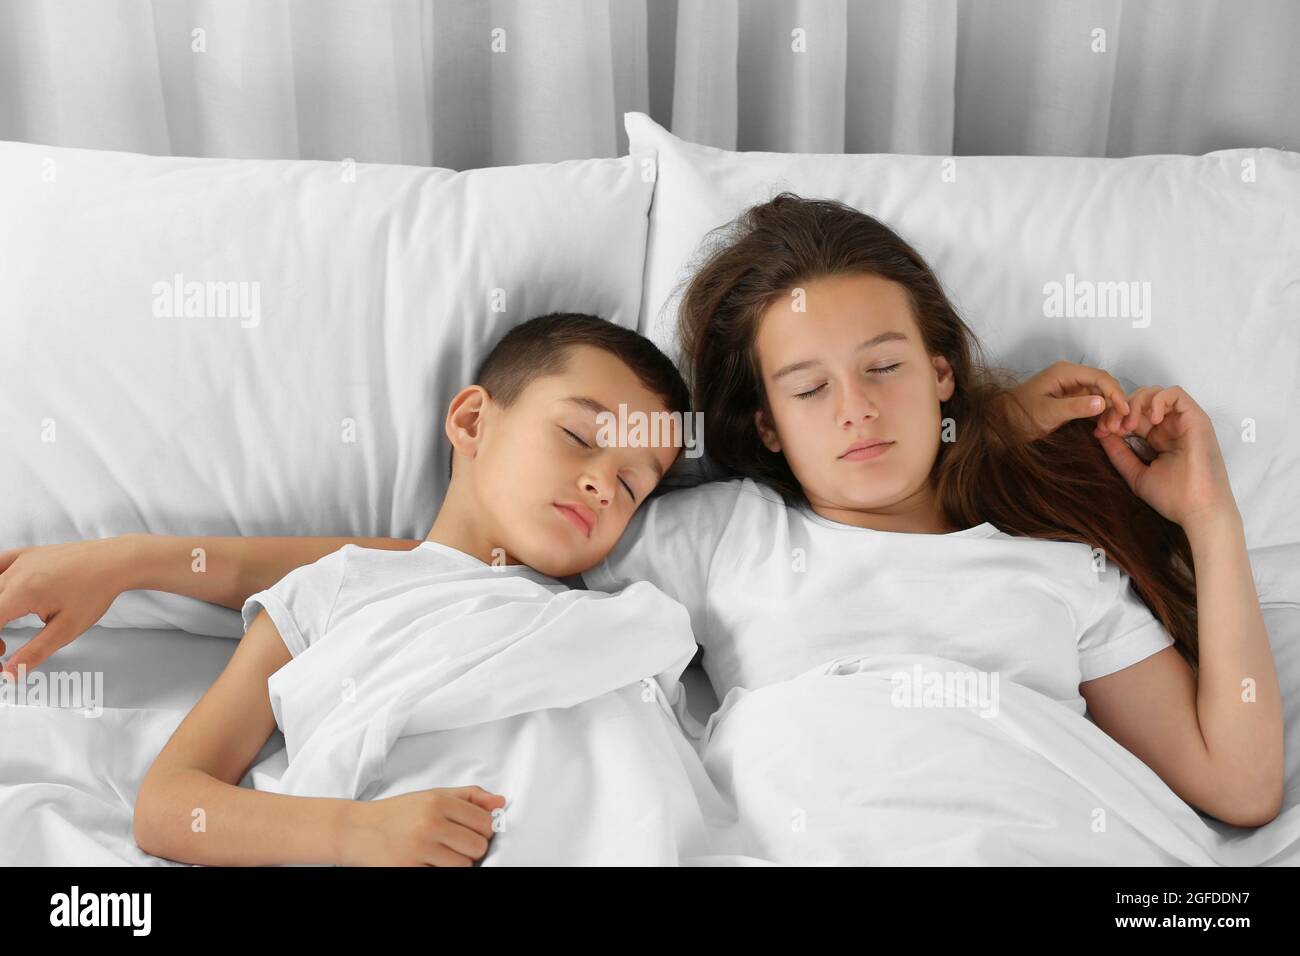 Brother and sister sleeping in bed Stock Photo image photo